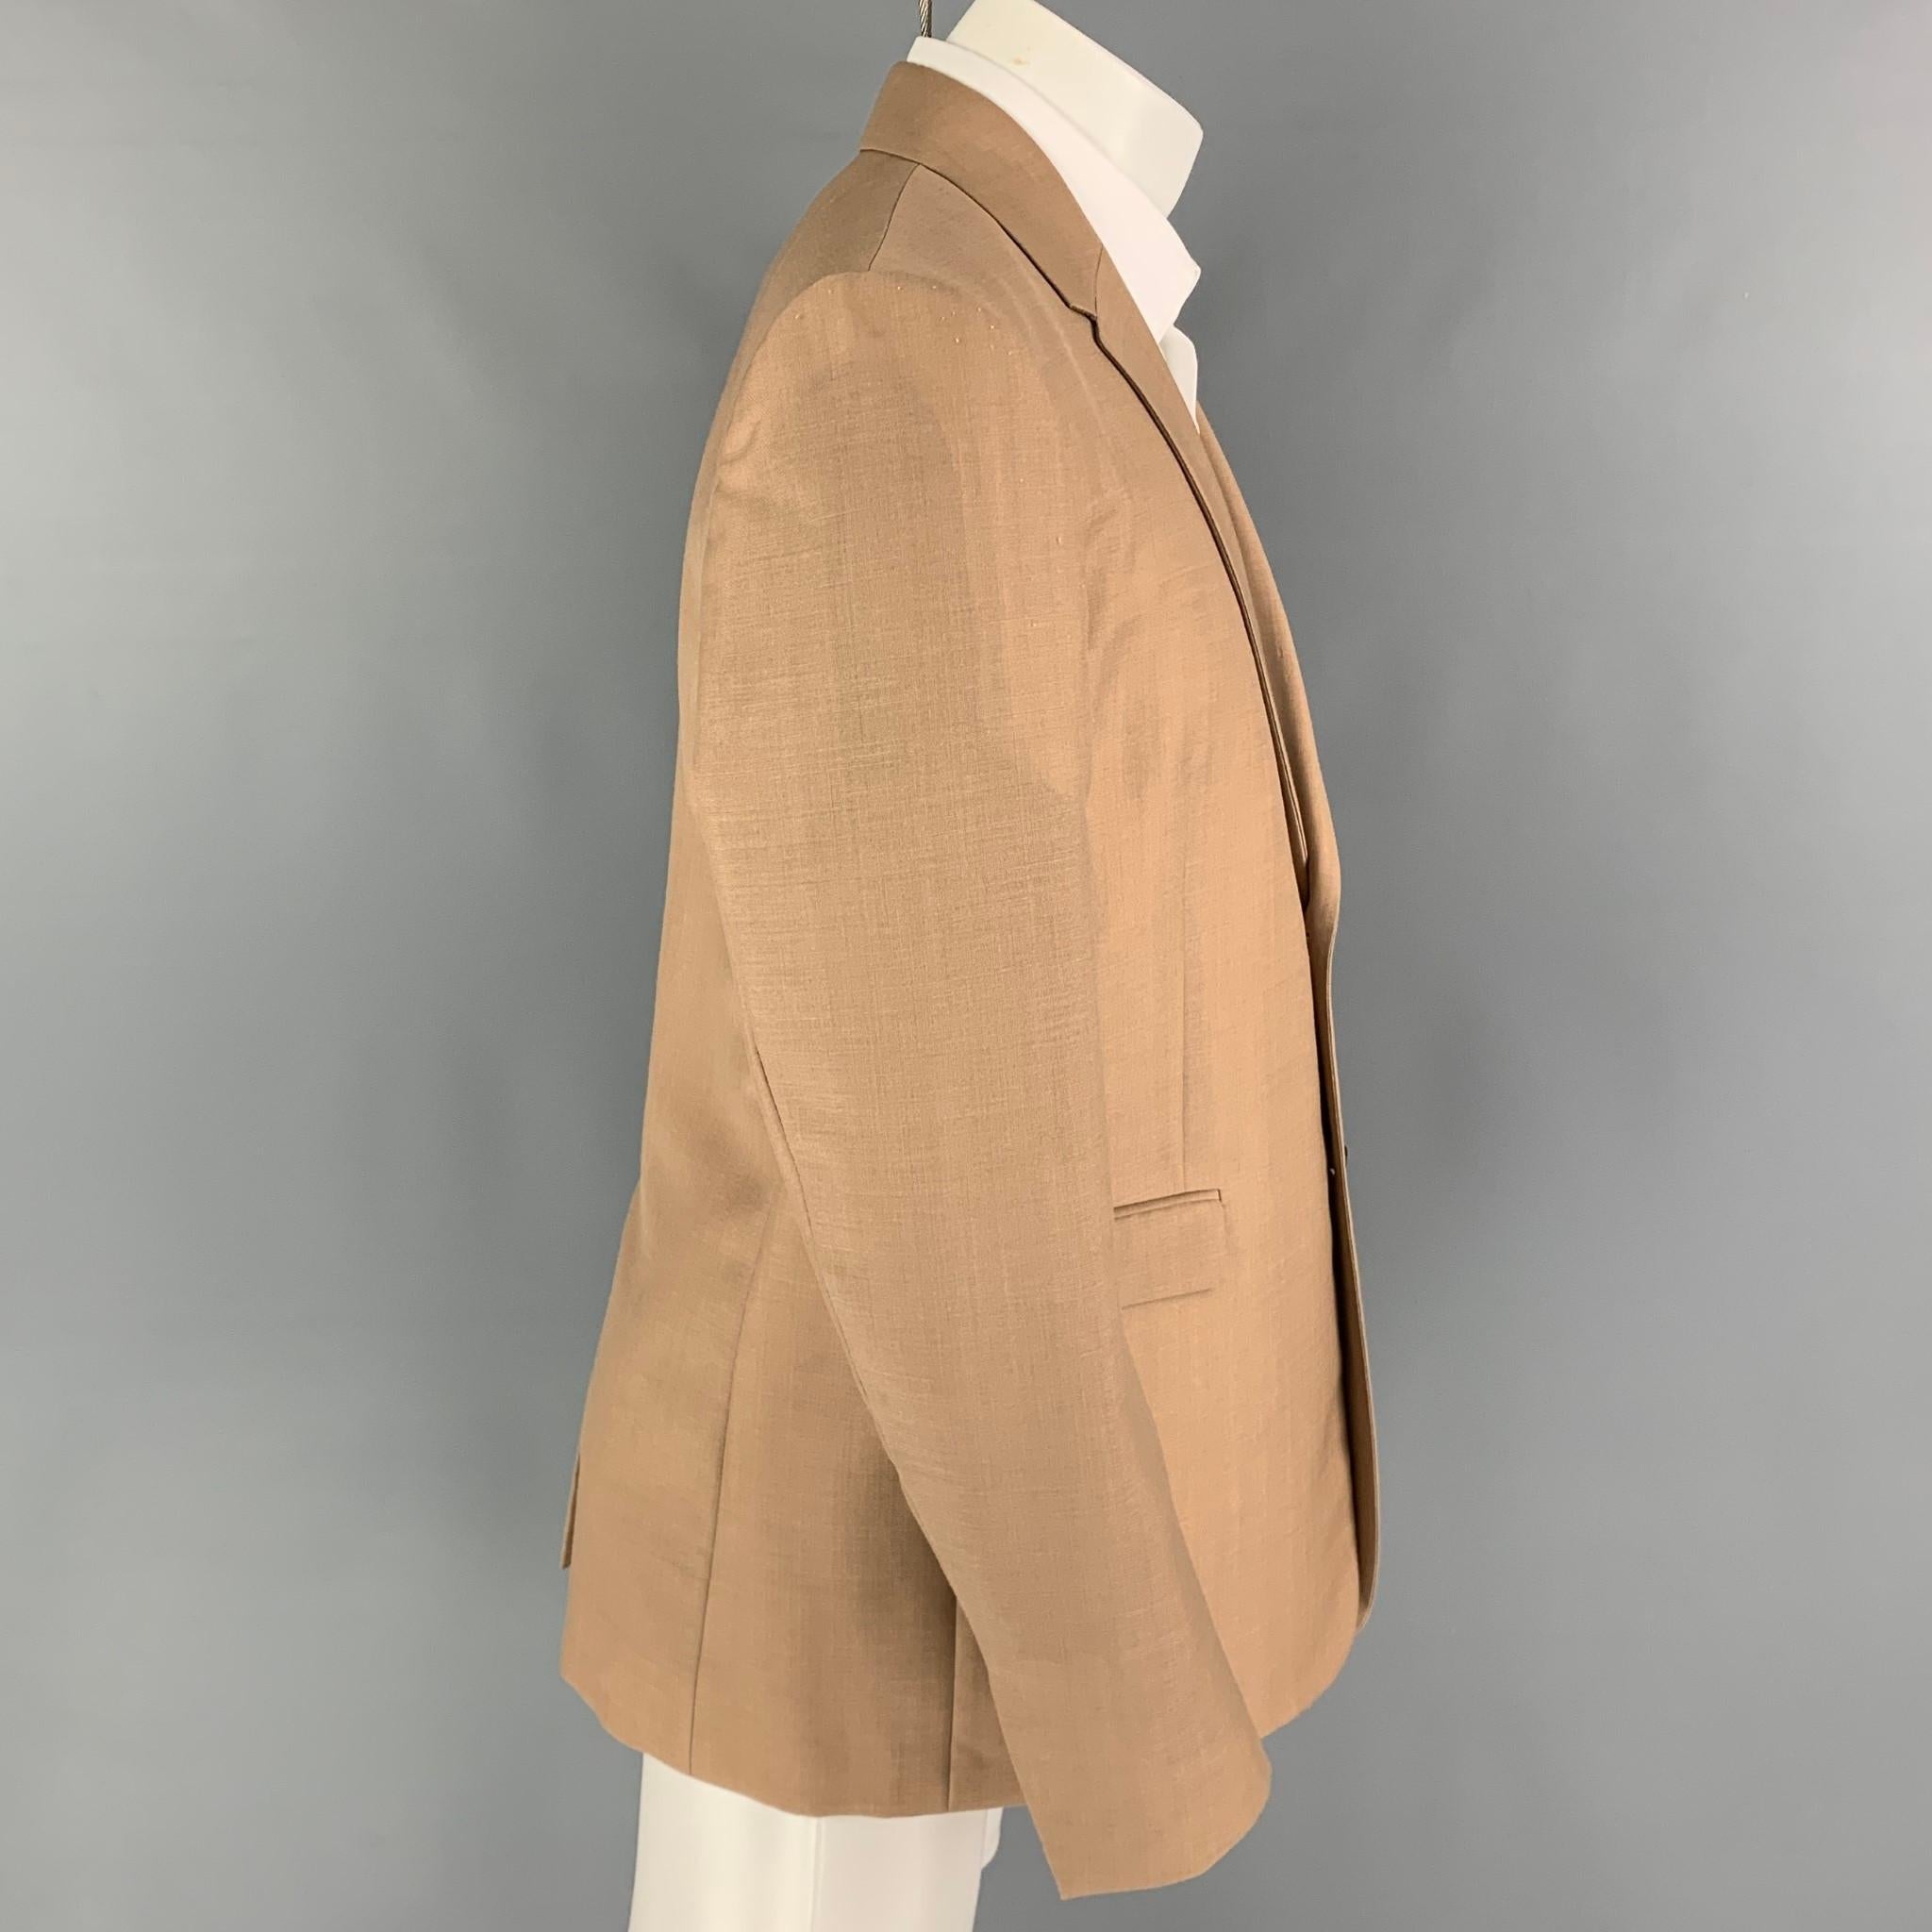 BOTTEGA VENETA Pre-Fall 2019 sport coat comes in a khaki mohair / wool with a full liner featuring a notch lapel, flap pockets, single back vent, and a double button closure. Made in Italy. 

Excellent Pre-Owned Condition.
Marked: